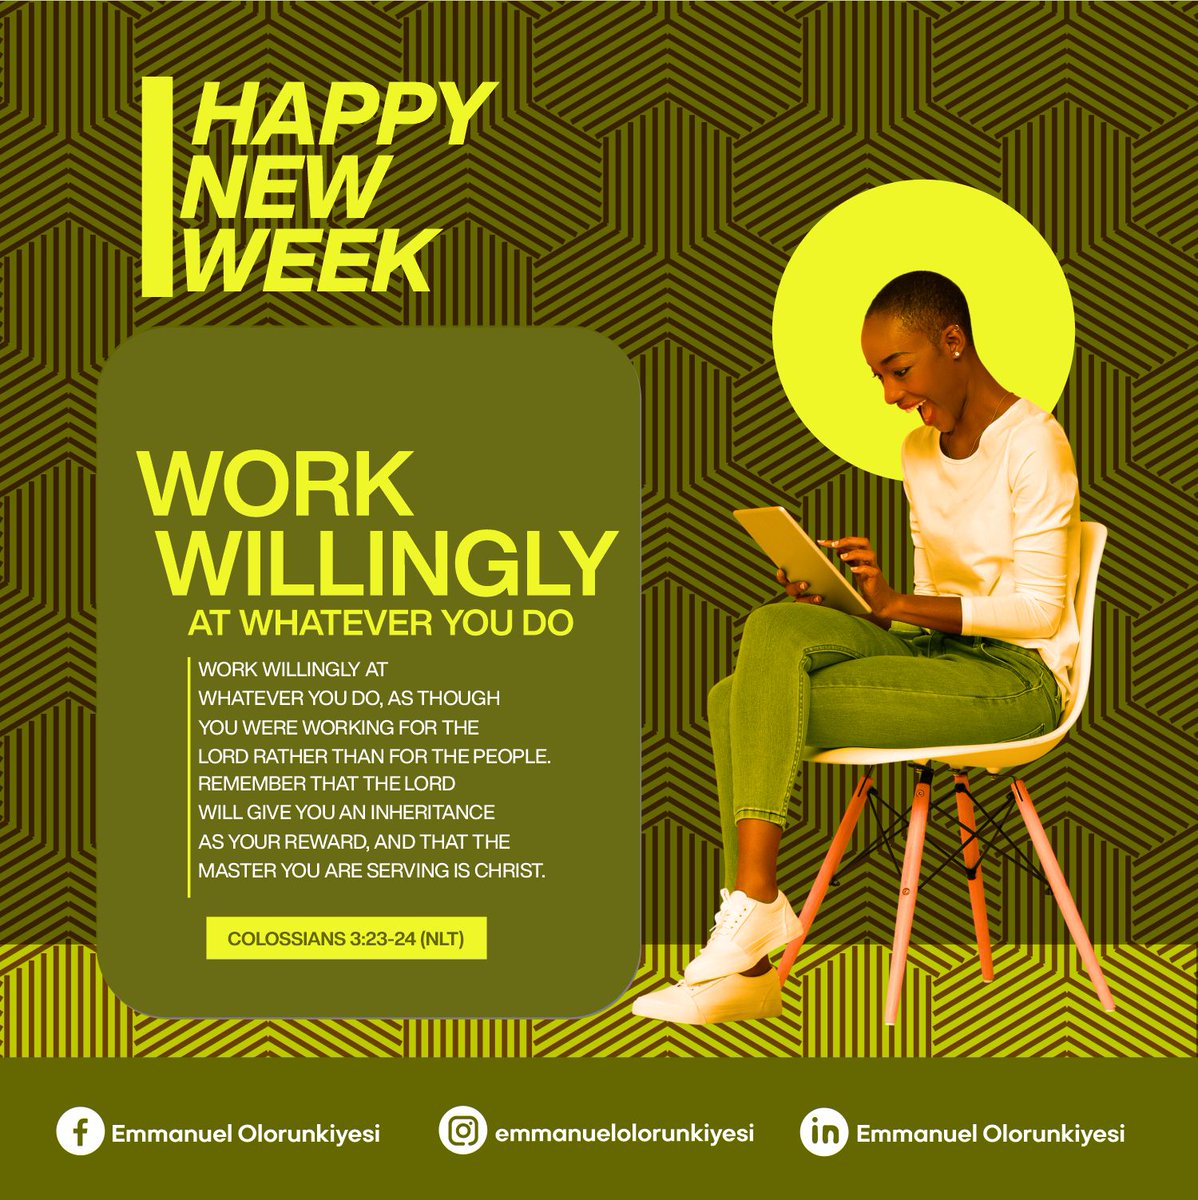 'Embrace the opportunity of a brand new week, filled with endless possibilities and fresh beginnings. Let's make it a week of growth, success, and positivity. 
.
.
.
.
.
.
.
.
#NewWeek #FreshStart #MondayMotivation #workforgood #workwell #julygraphics  #GraphicDesign